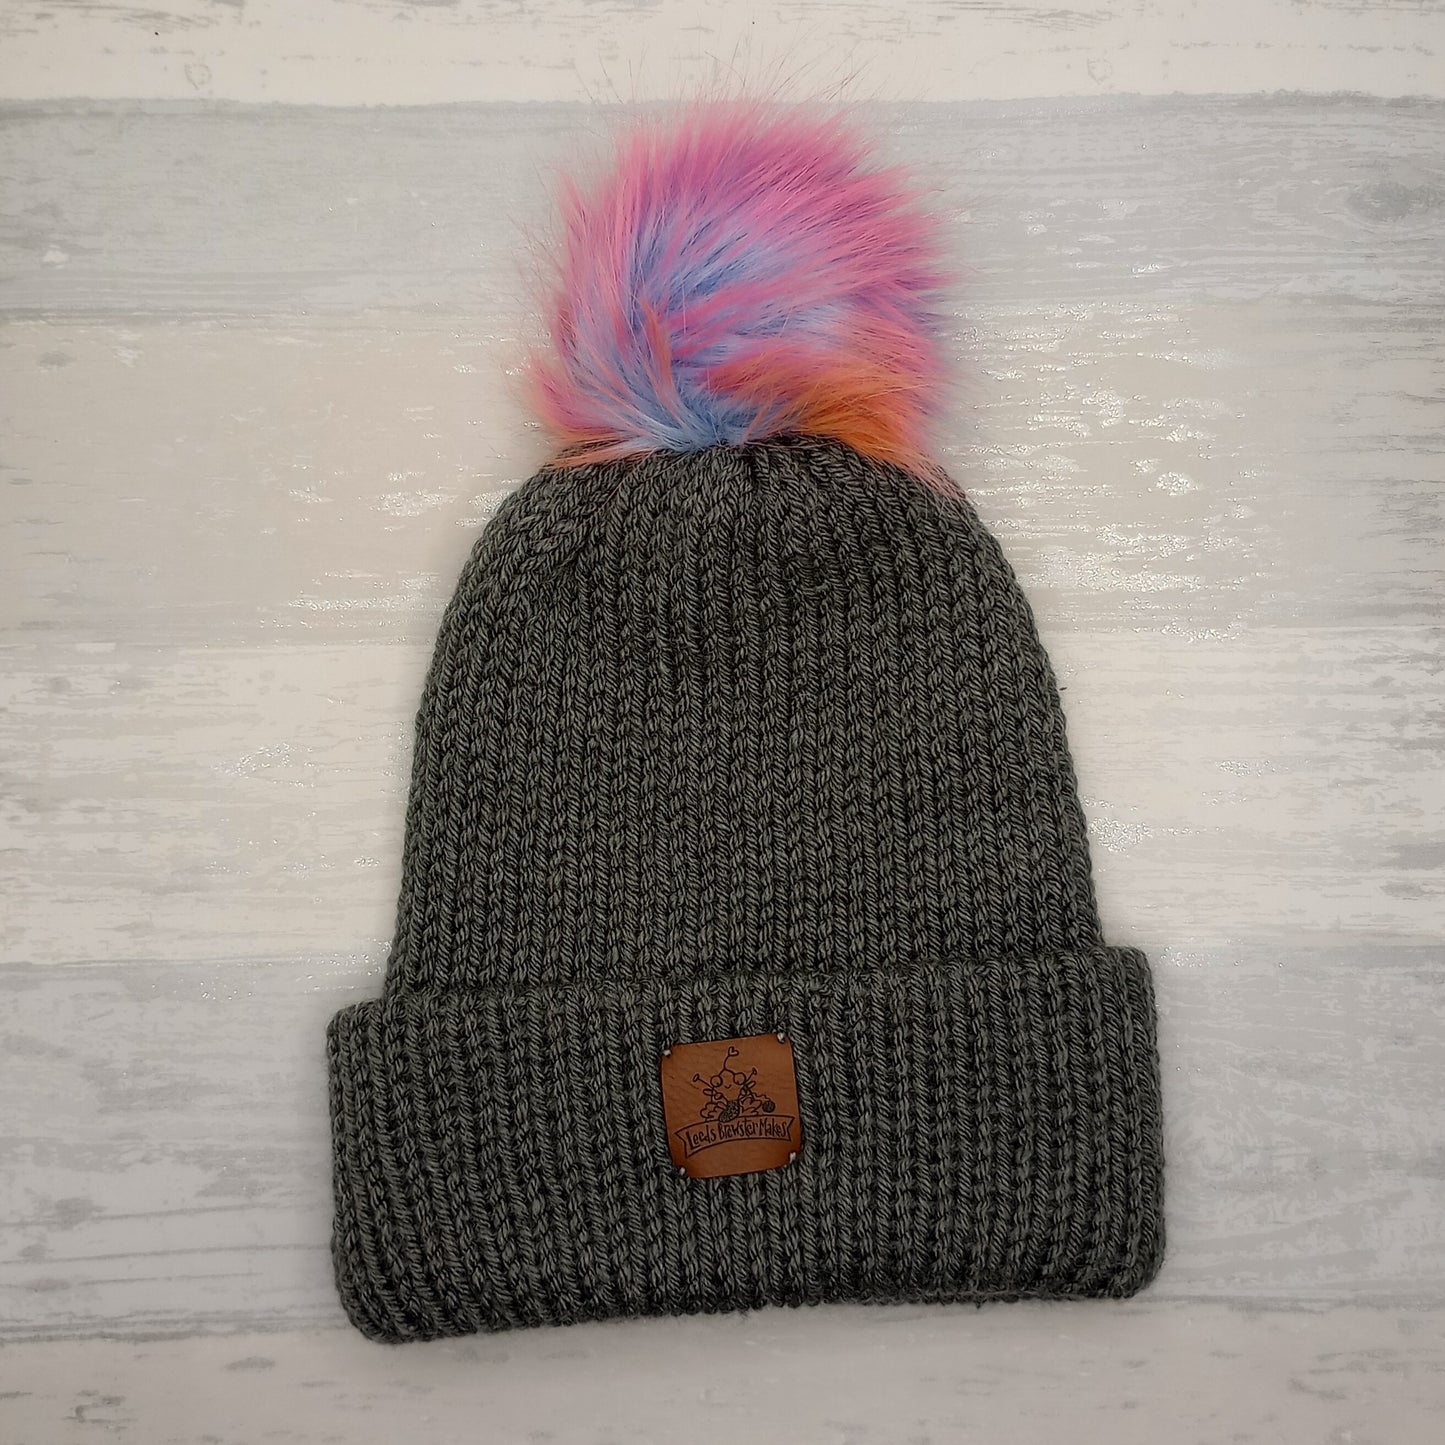 Adult Knitted Grey hat with a Rainbow Pompom